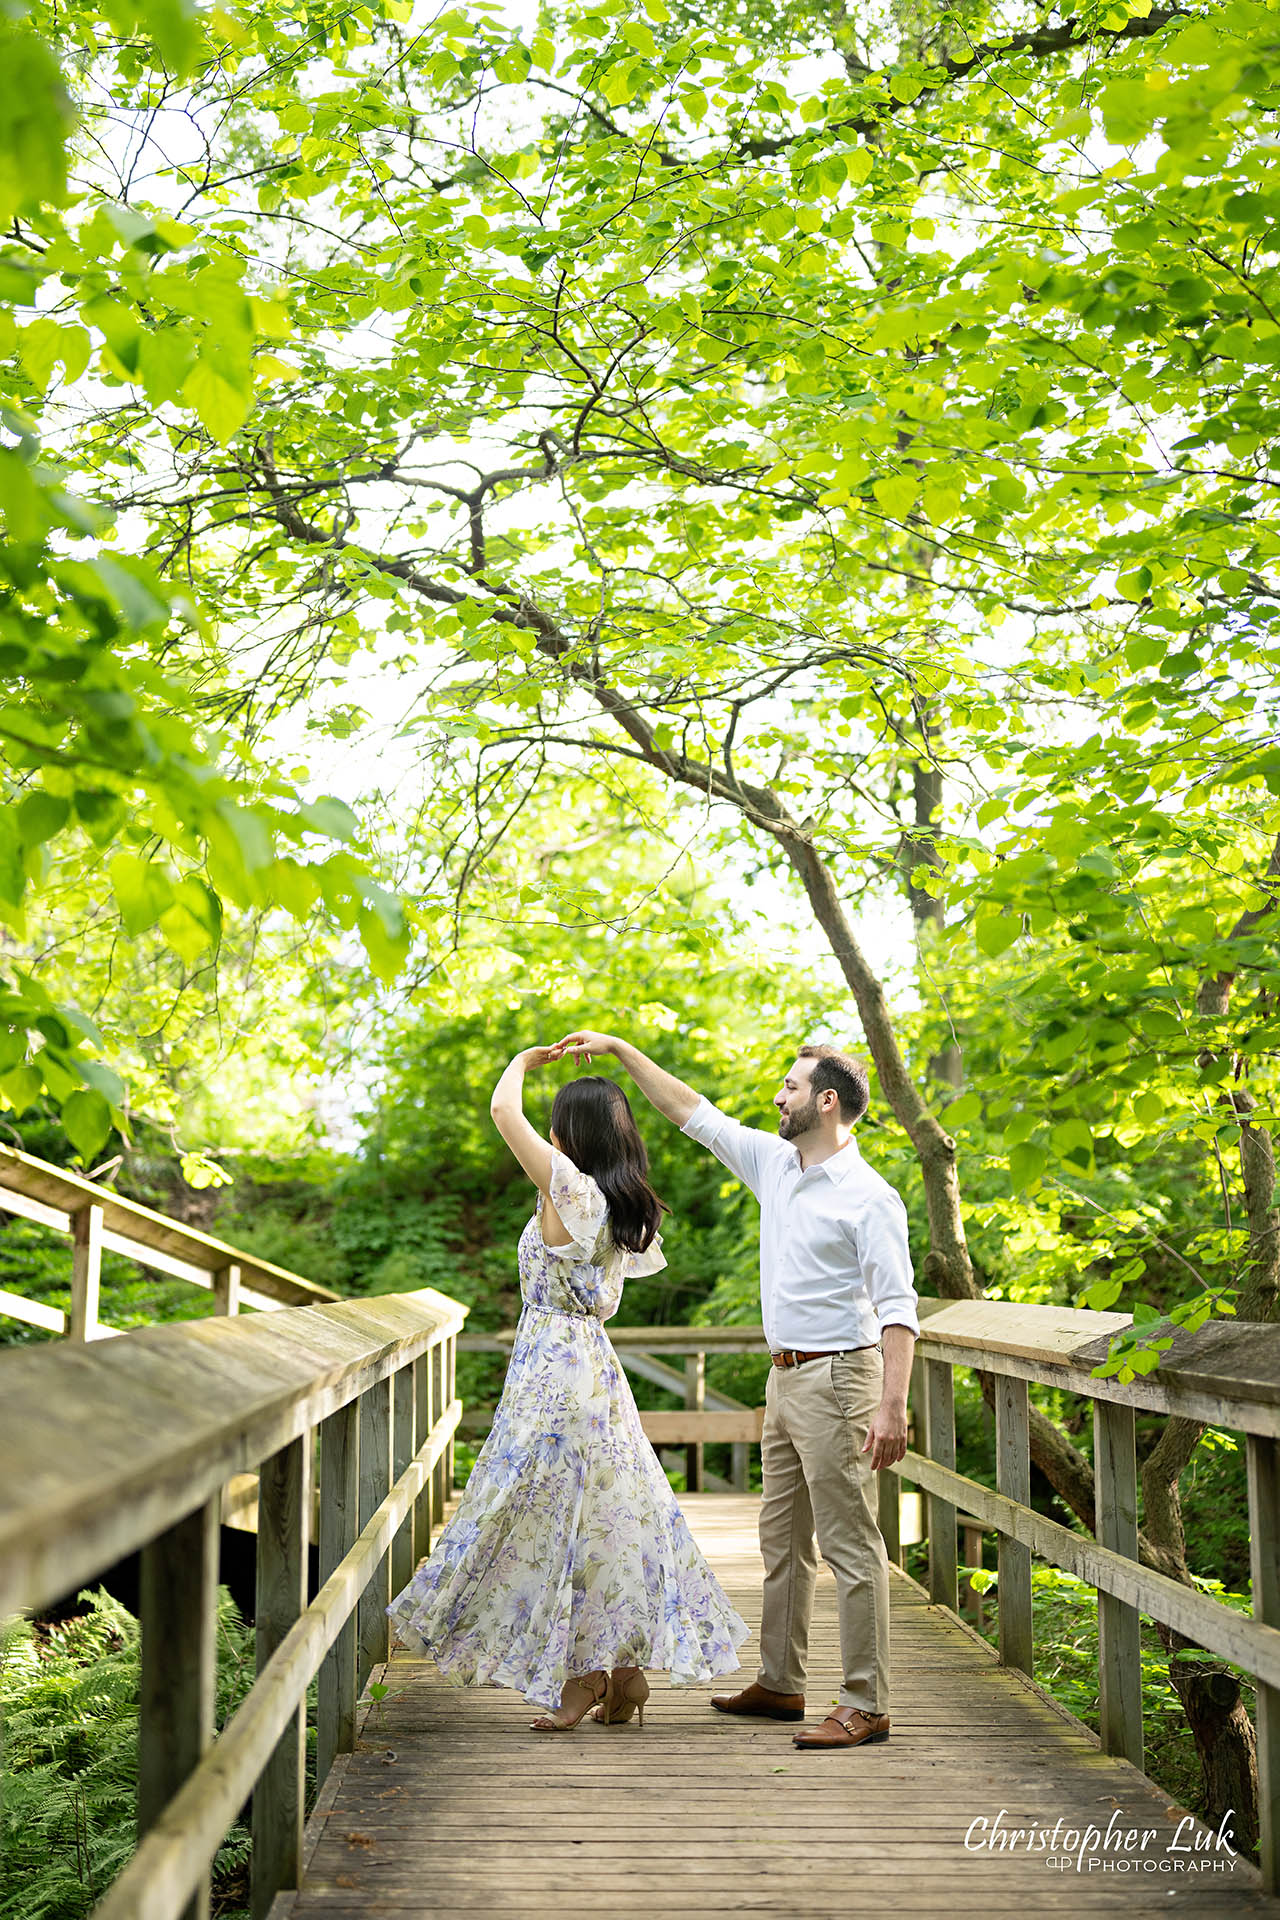 Bride with Groom Boardwalk Forest Woodland Candid Natural Photojournalistic Organic Dancing Spinning Twirling Portrait